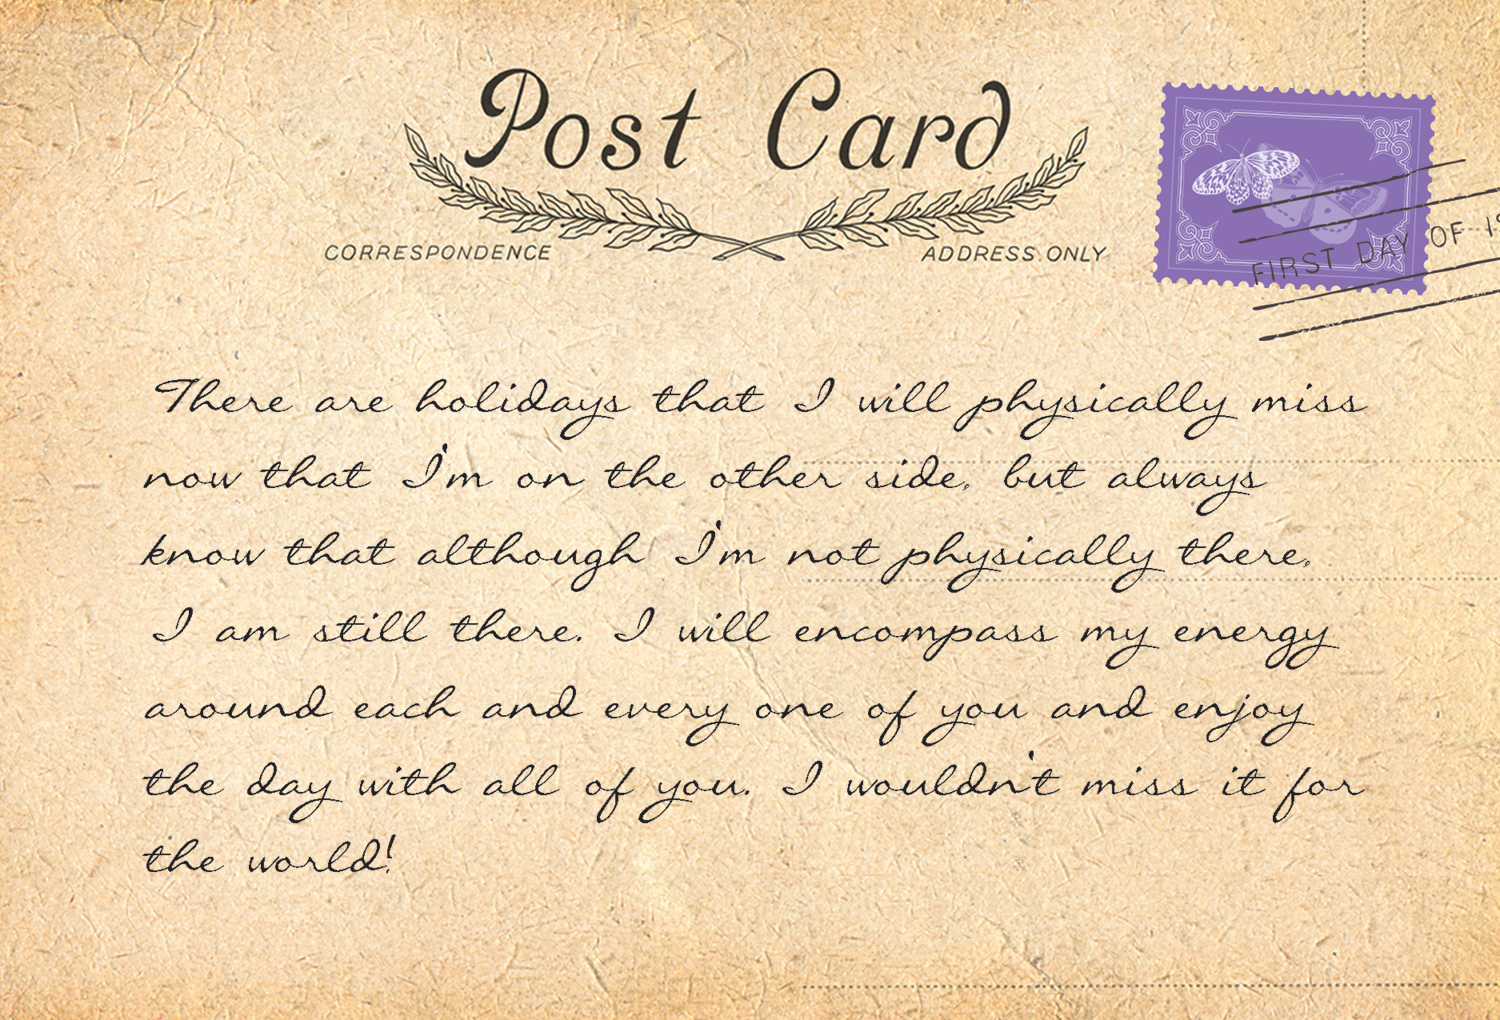 POSTCARDS FROM HEAVEN 2 - back 3